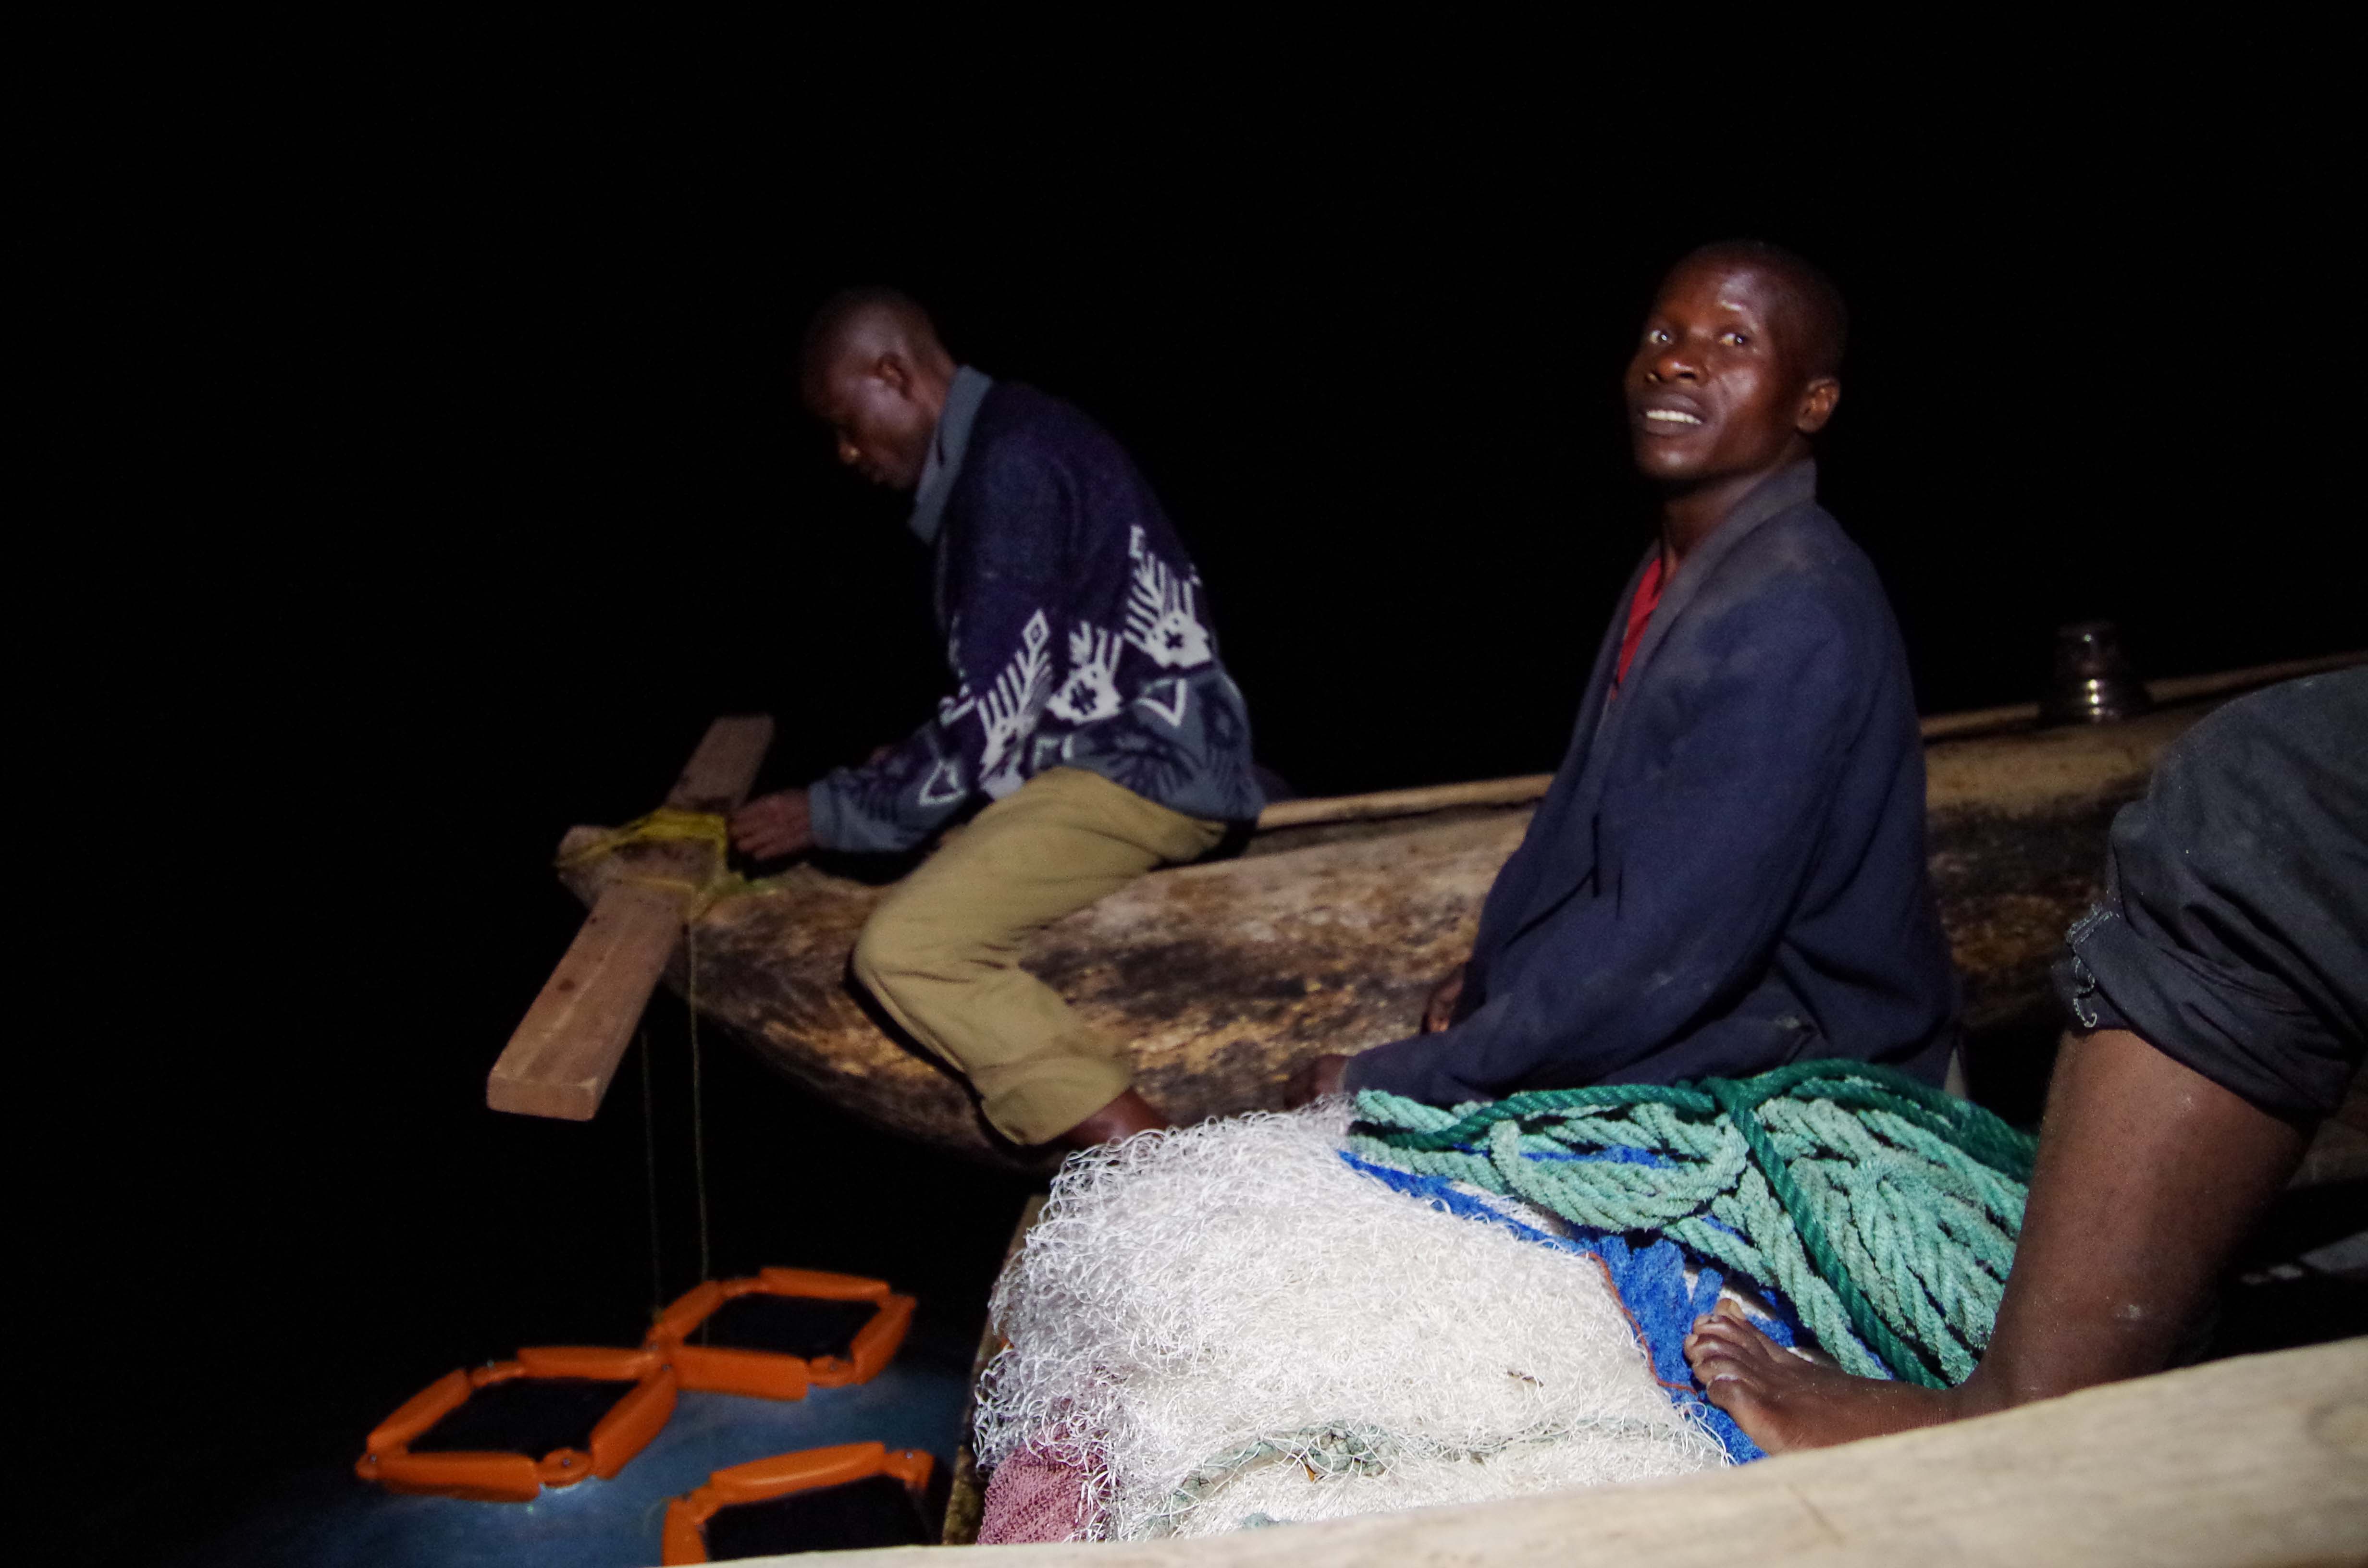 The Workmate W100 is used in Lake Victoria, Tanzania by artisan fisherman who use the light to attract and catch fish.